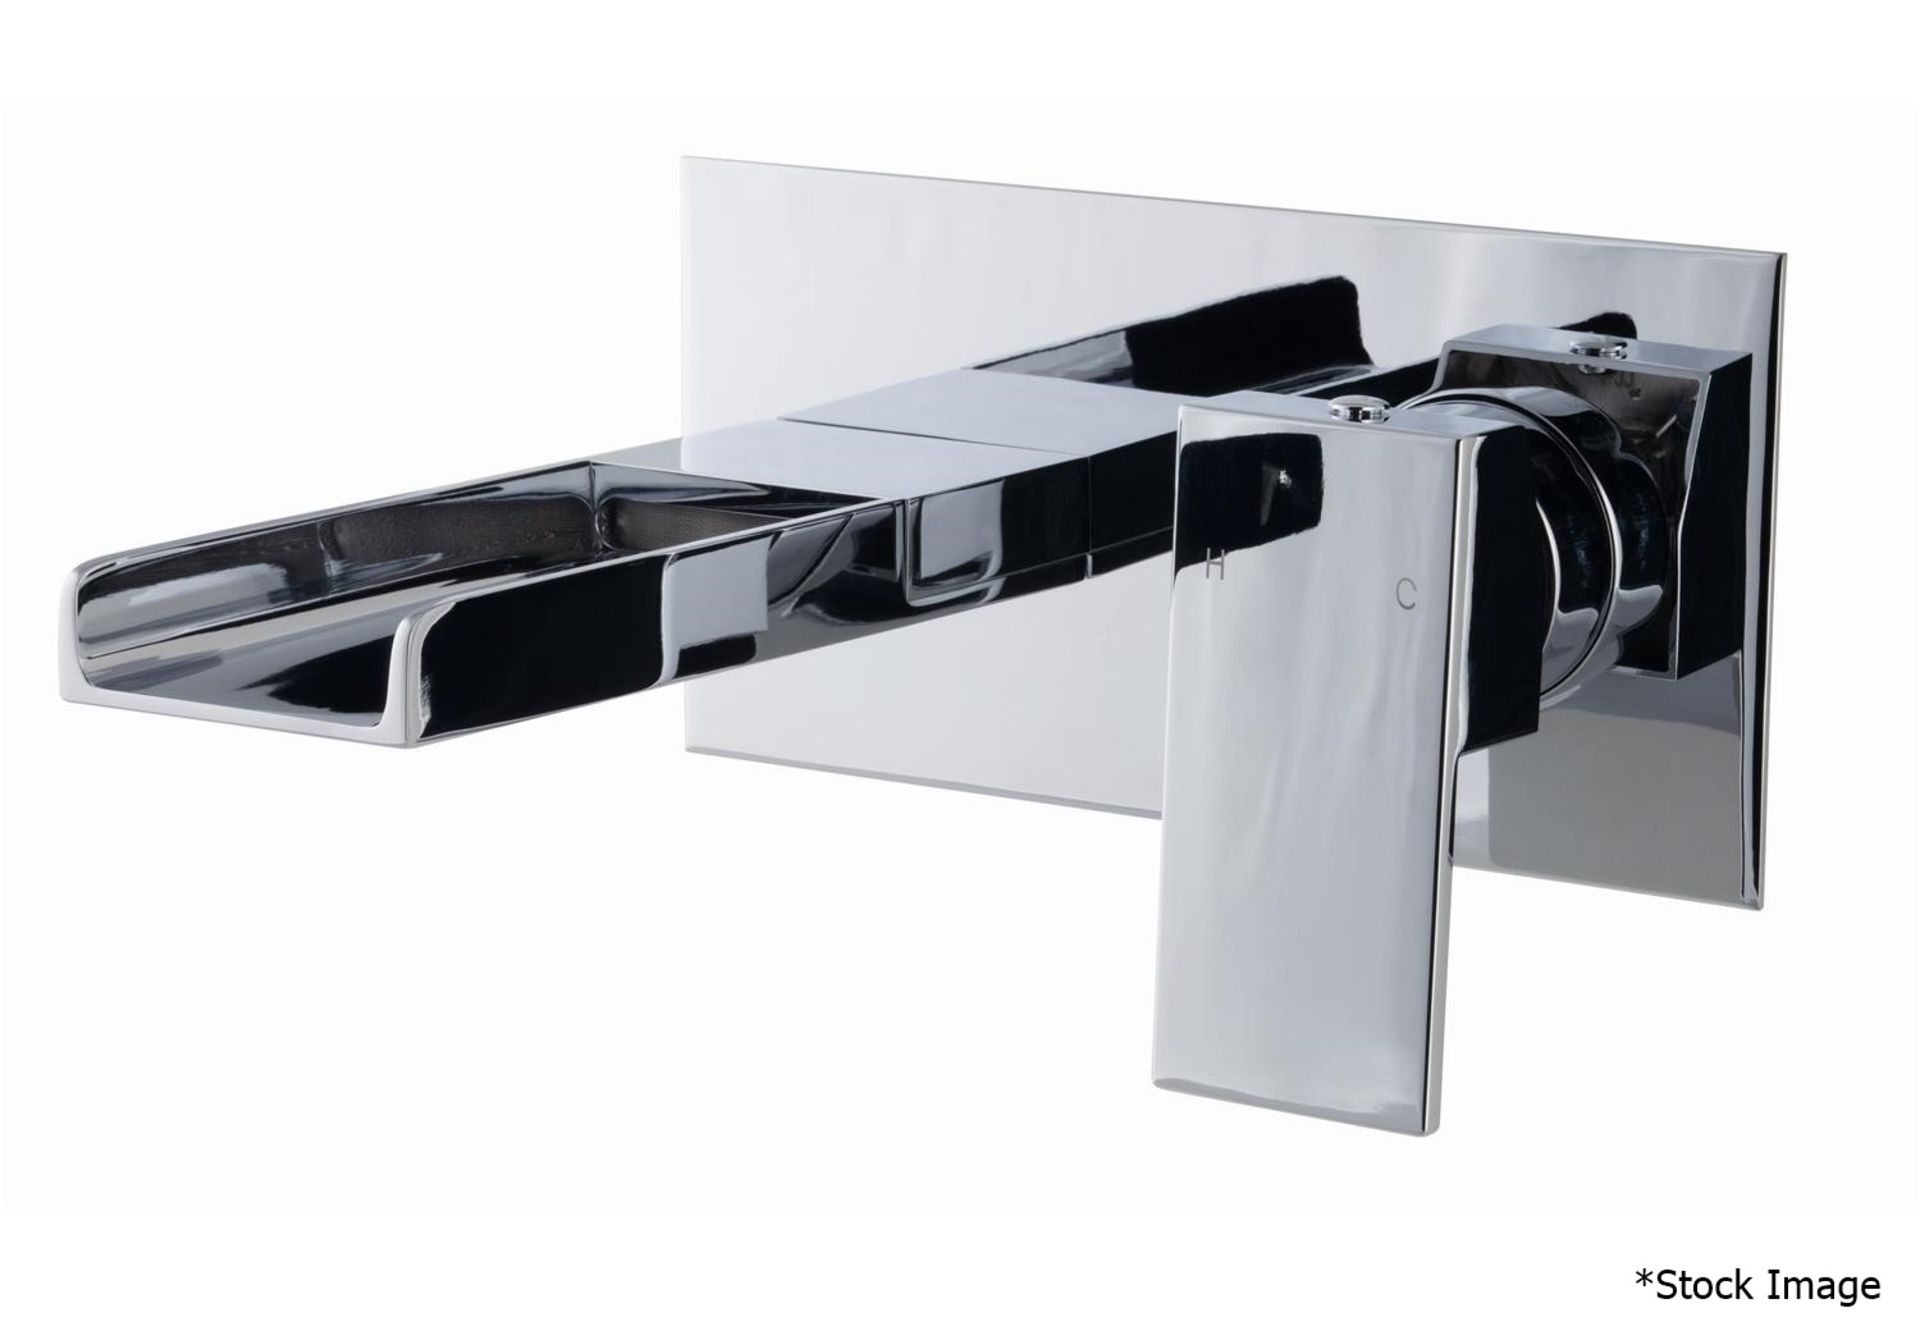 1 x Cassellie 'Dunk' Wall Mounted Waterfall Bath Tap - Ref: DUK016 - New & Boxed Stock - RRP 130.00 - Image 3 of 4